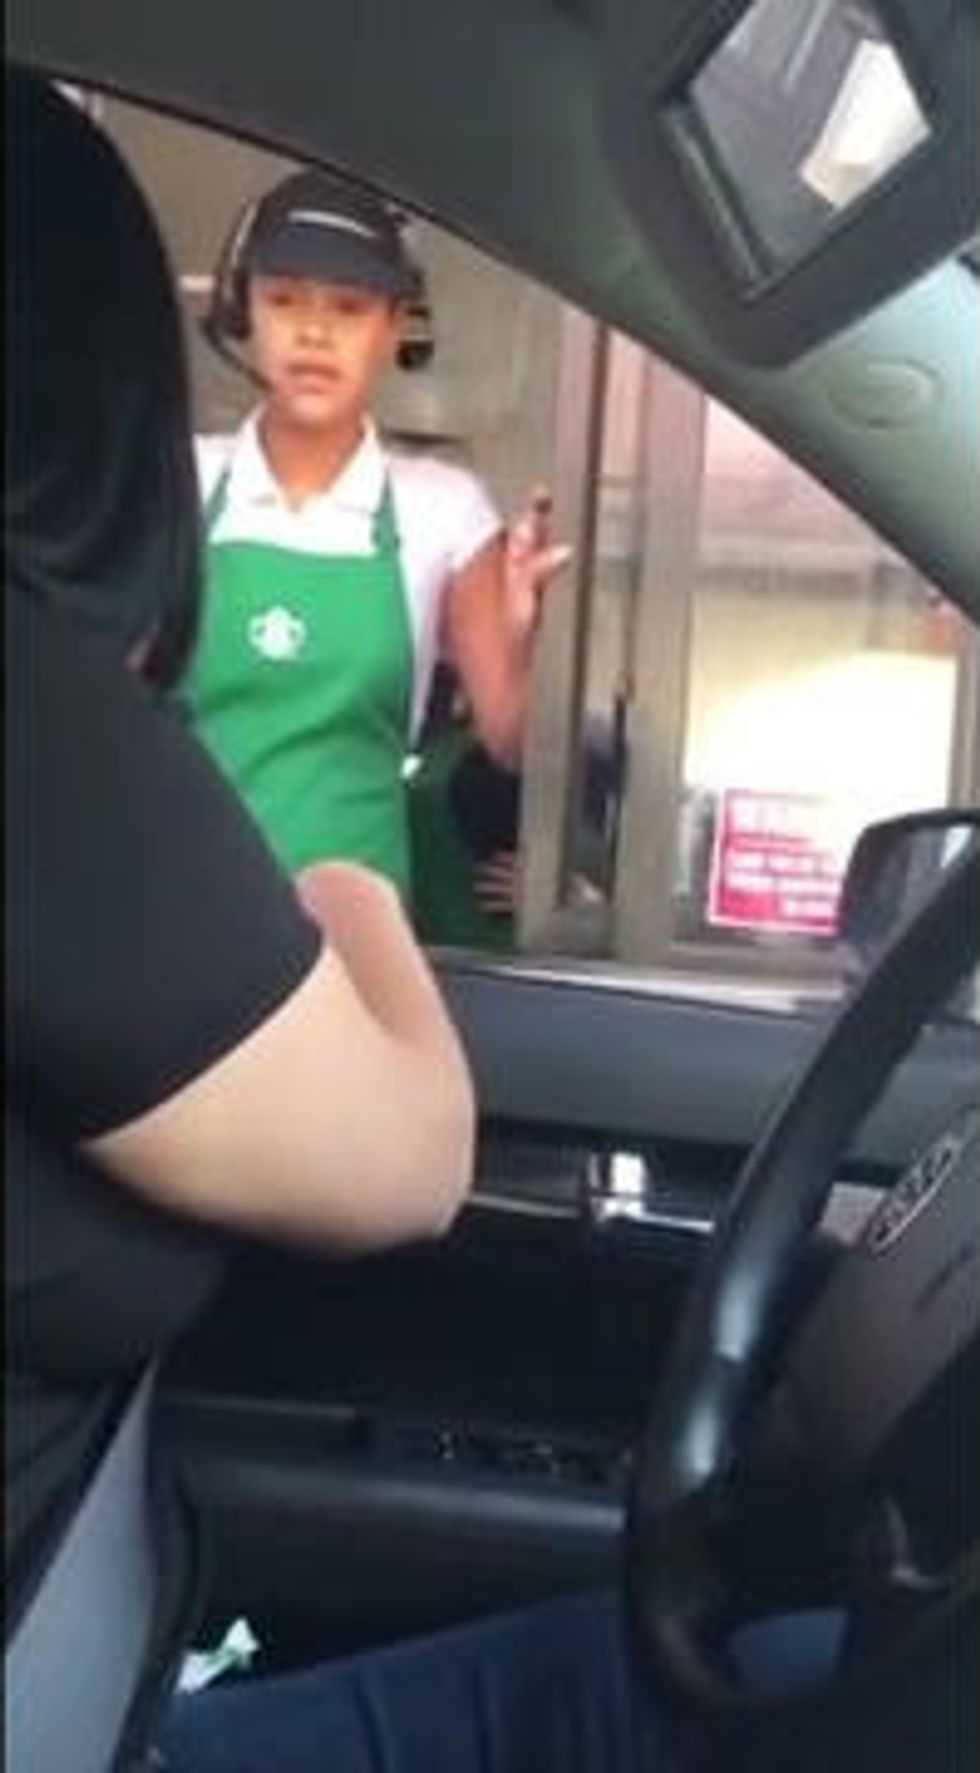 Starbucks Customer 'Gets Even' With Worker Who Allegedly Stole Her Credit Card Number for $200 Grocery Store Purchase